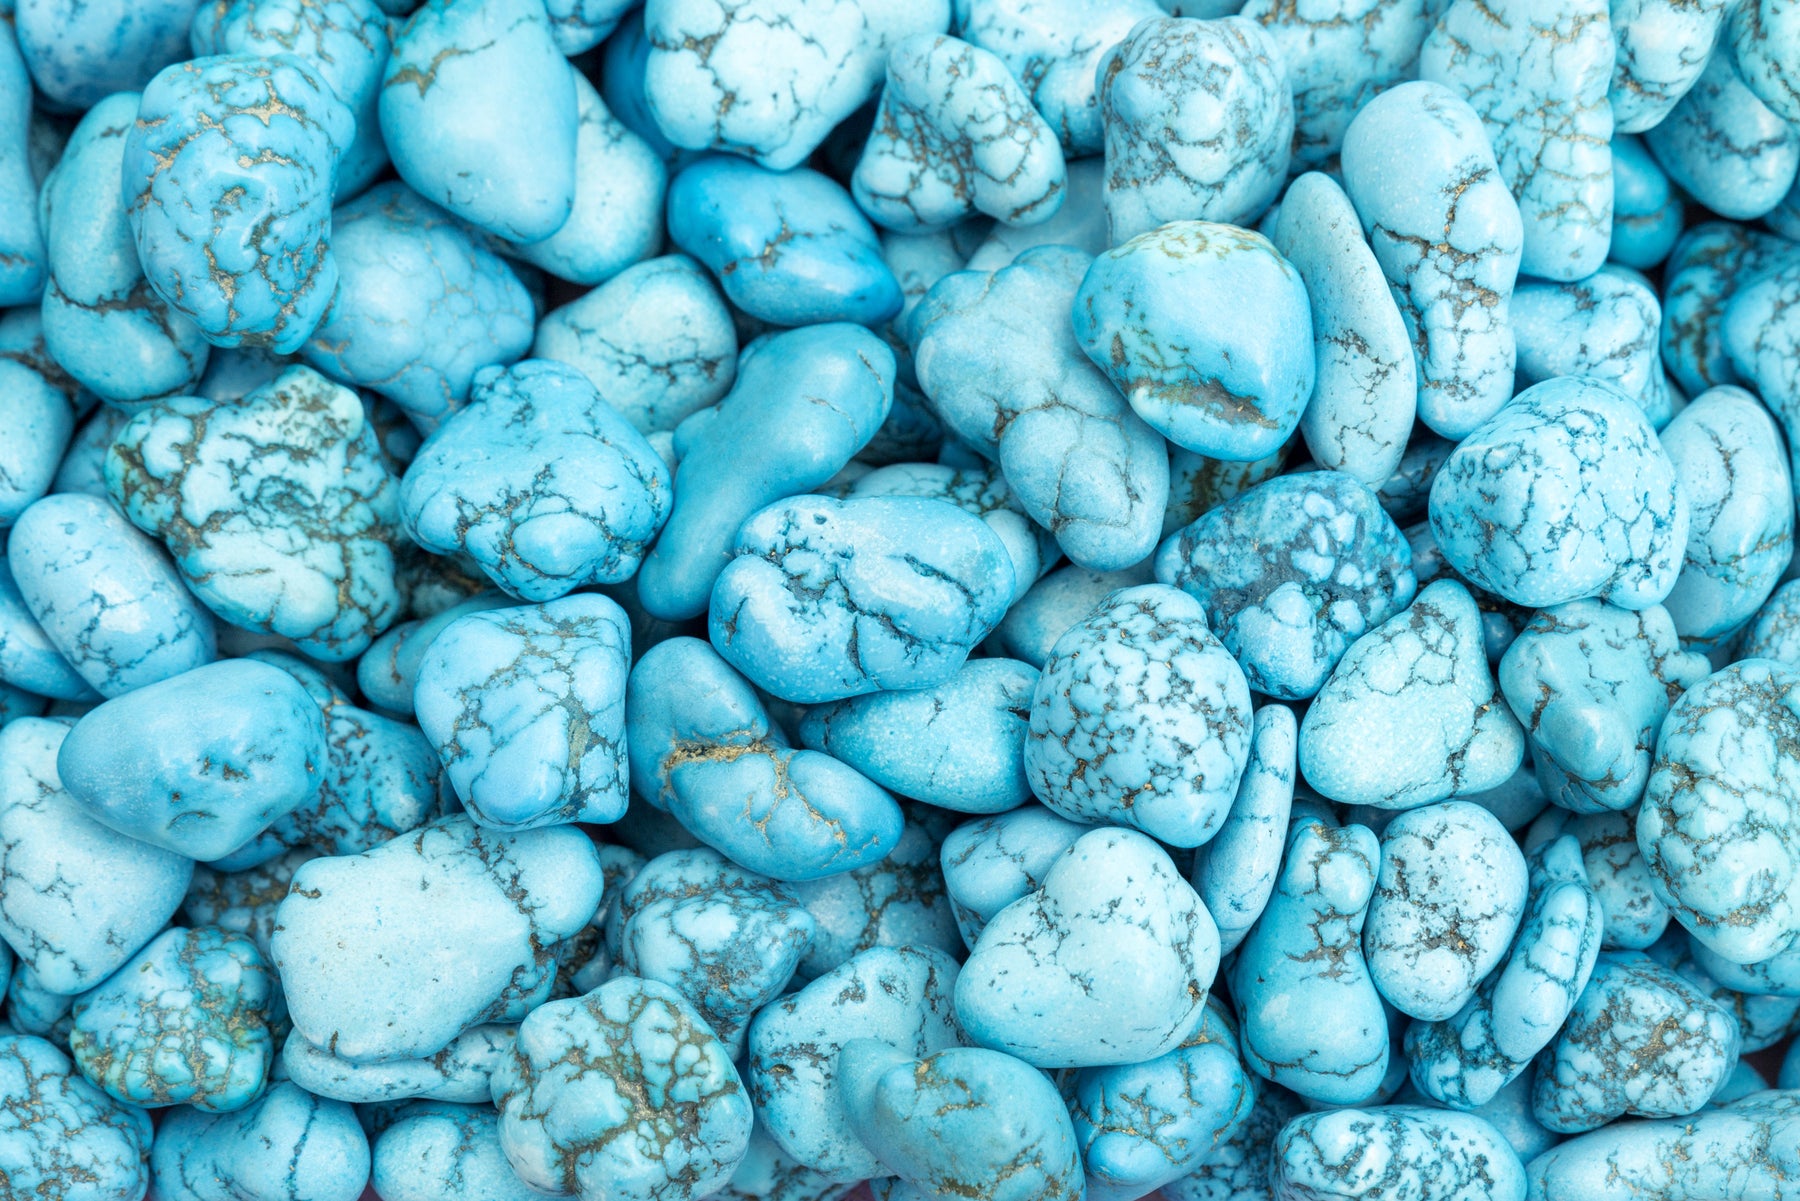 Differences Between Natural vs. Stabilized Turquoise